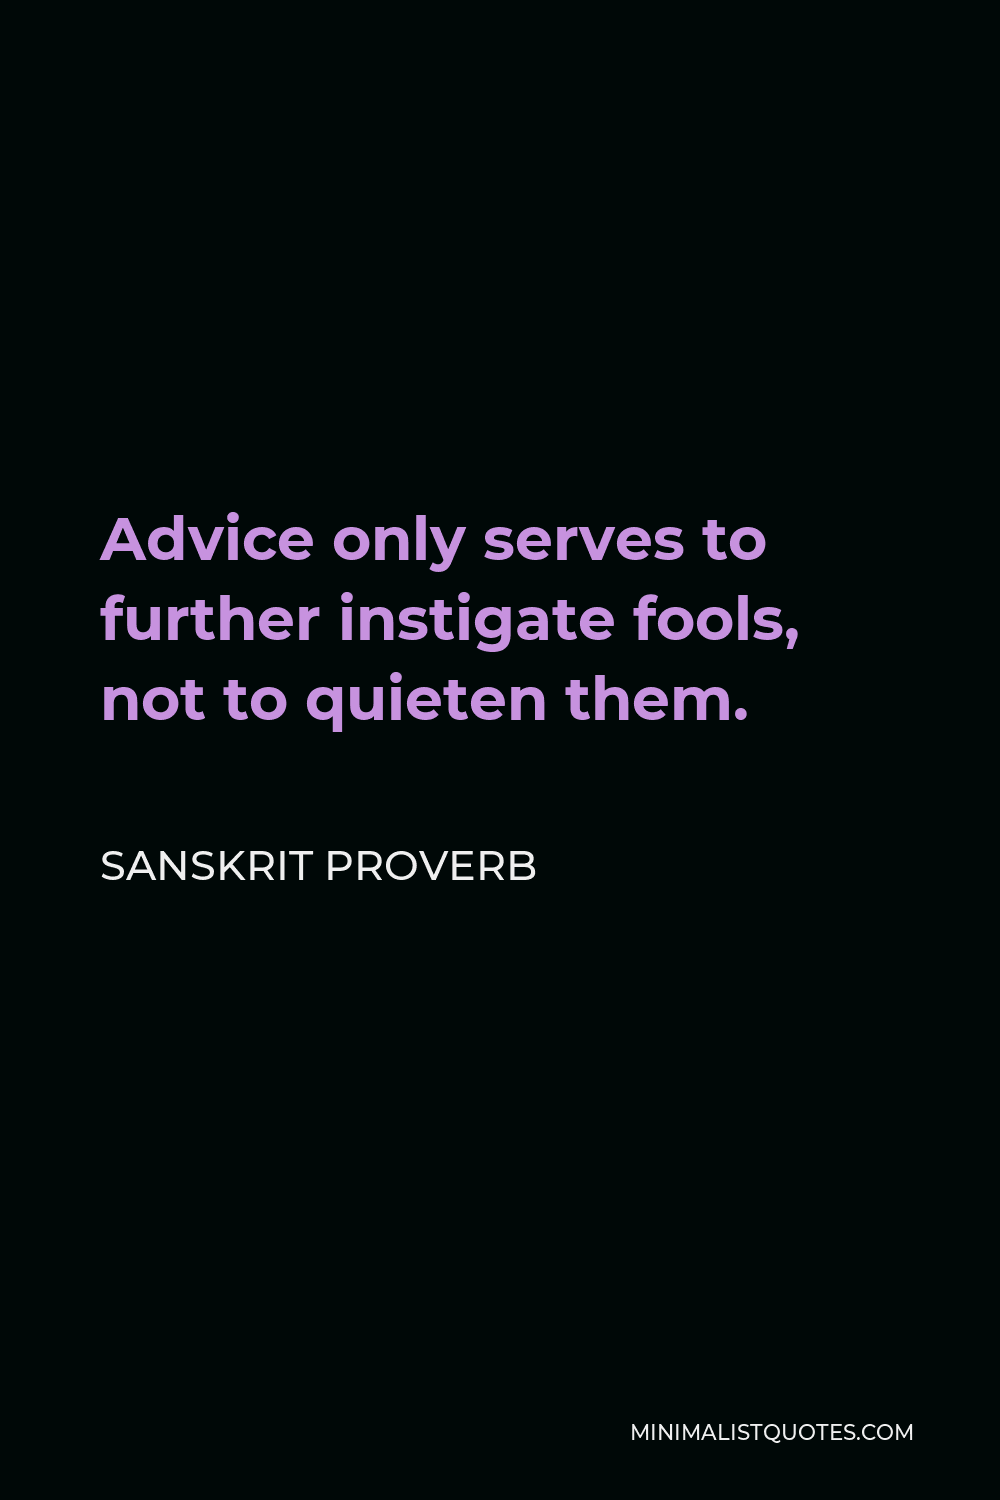 Sanskrit Proverb Quote - Advice only serves to further instigate fools, not to quieten them.